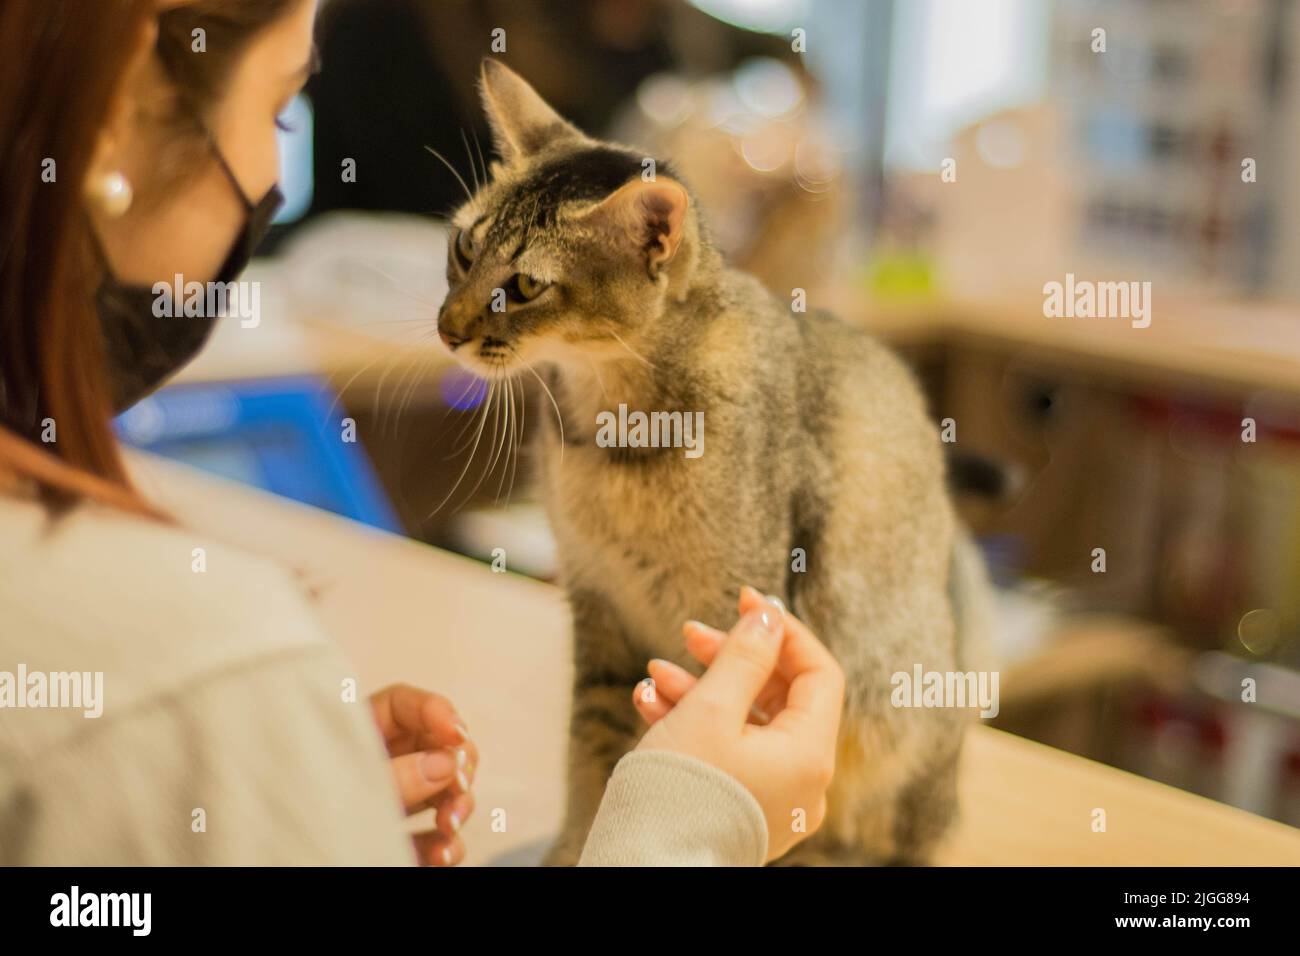 A woman standing in front of a gray cat sitting on a counter desk Stock Photo